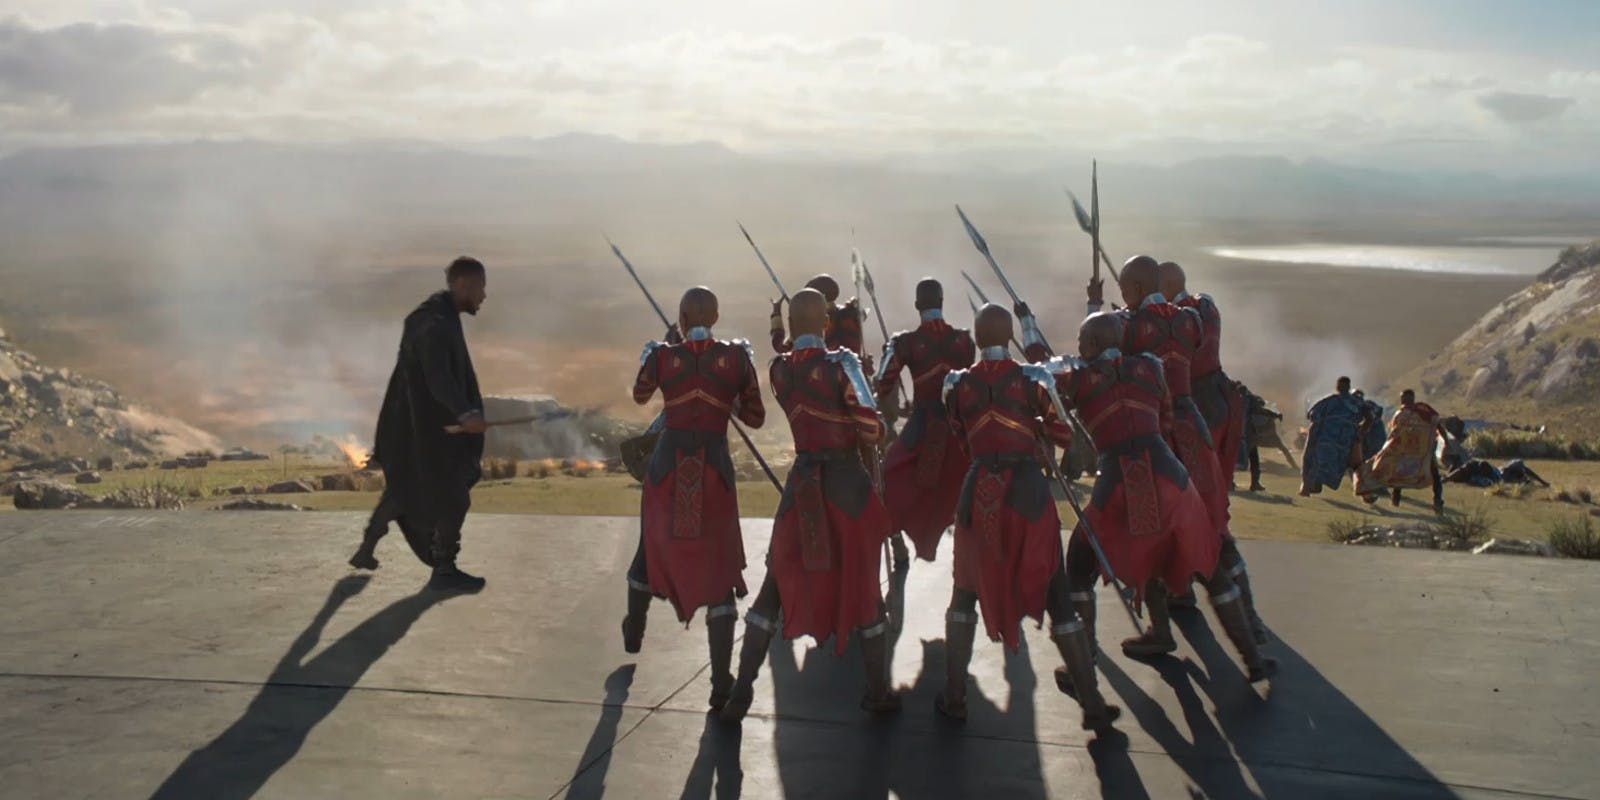 Black Panther's Dora Milaje appear to be wearing sensible flats as they practice.